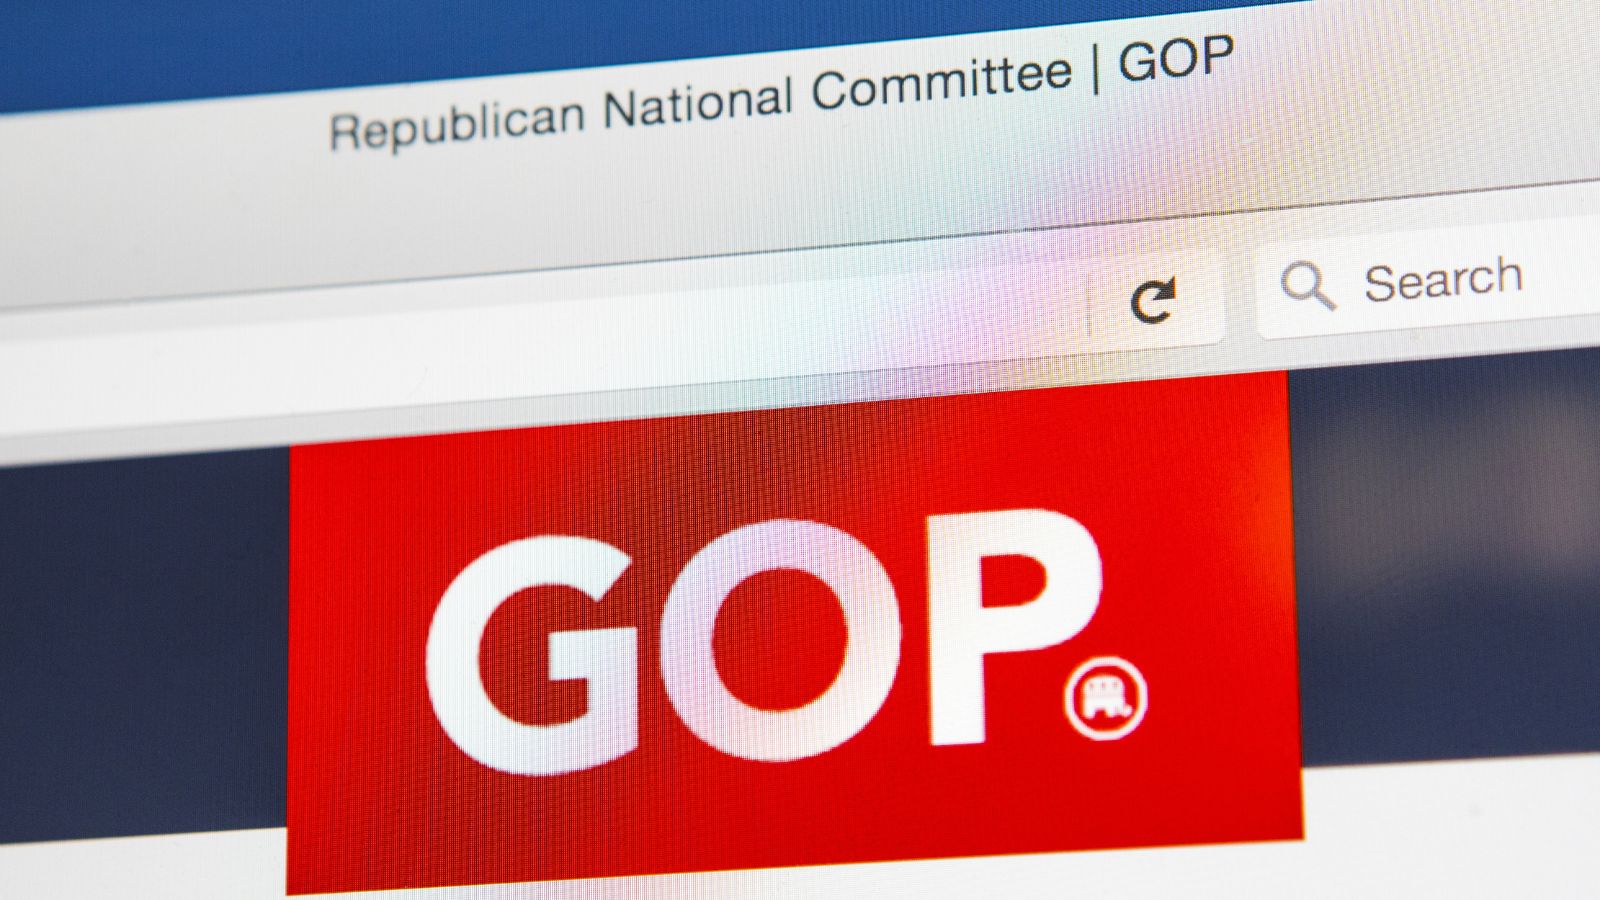 The homepage of the official website for the Republican Party, also known as the GOP (Grand Old Party)